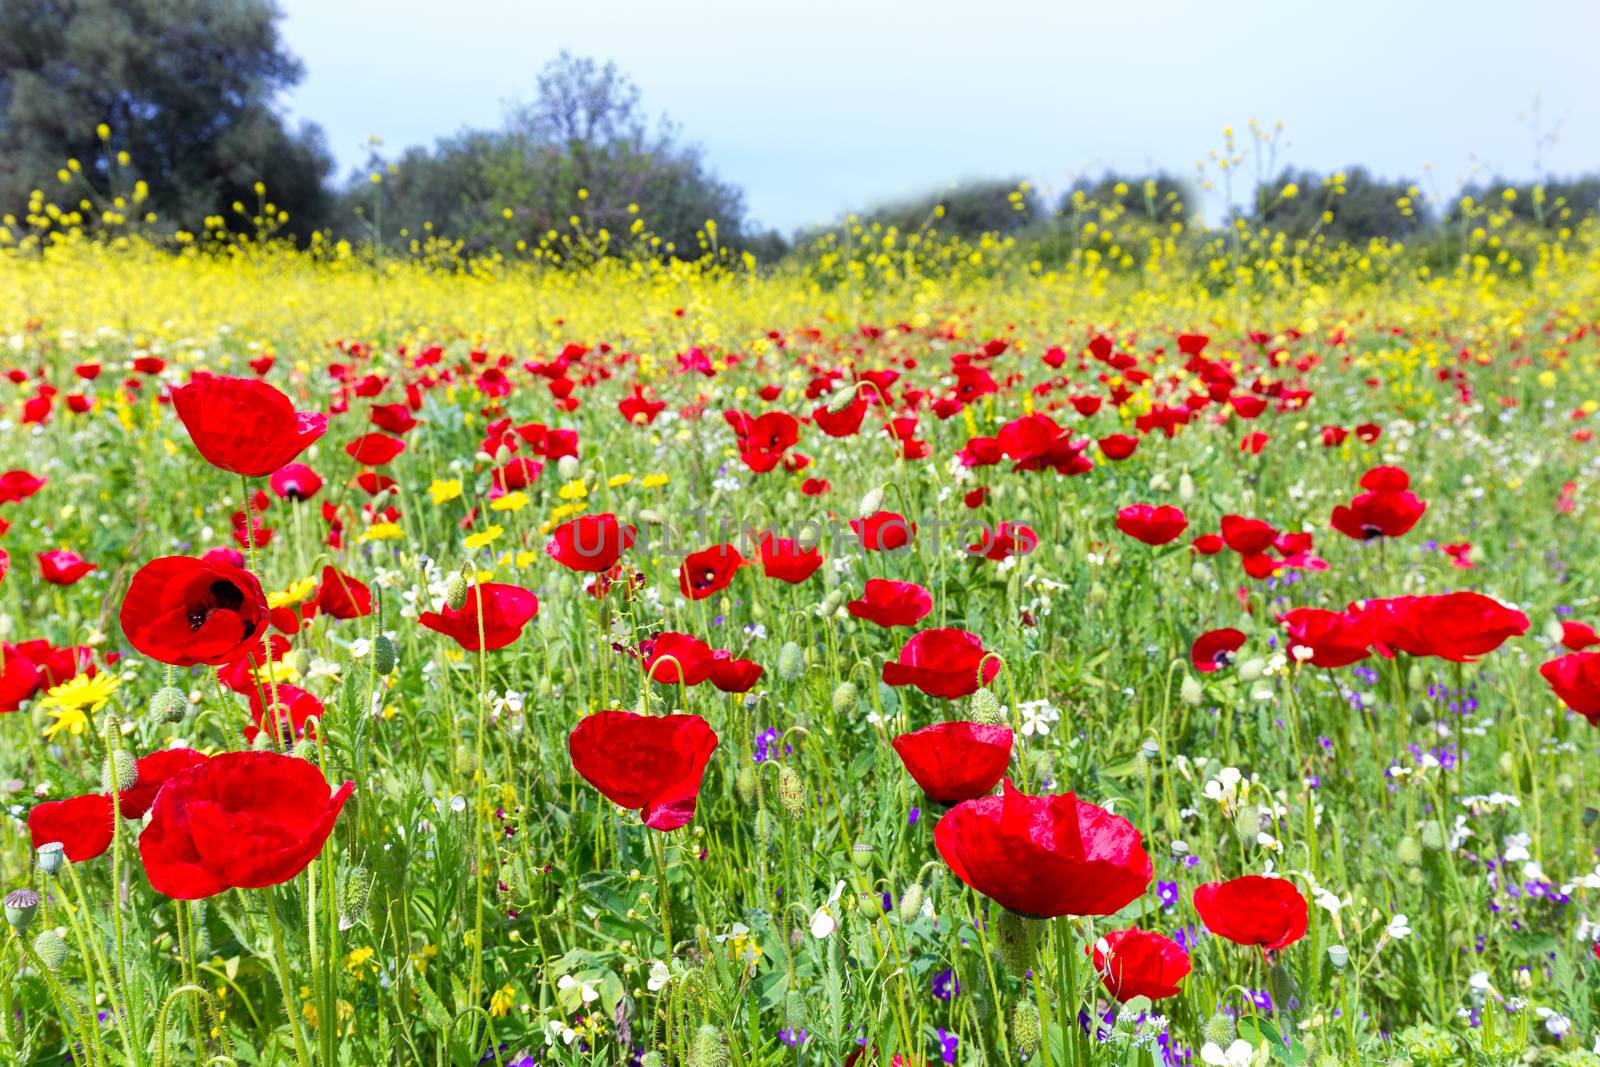 Field of red poppy flowers with yellow rapeseed plants by BenSchonewille